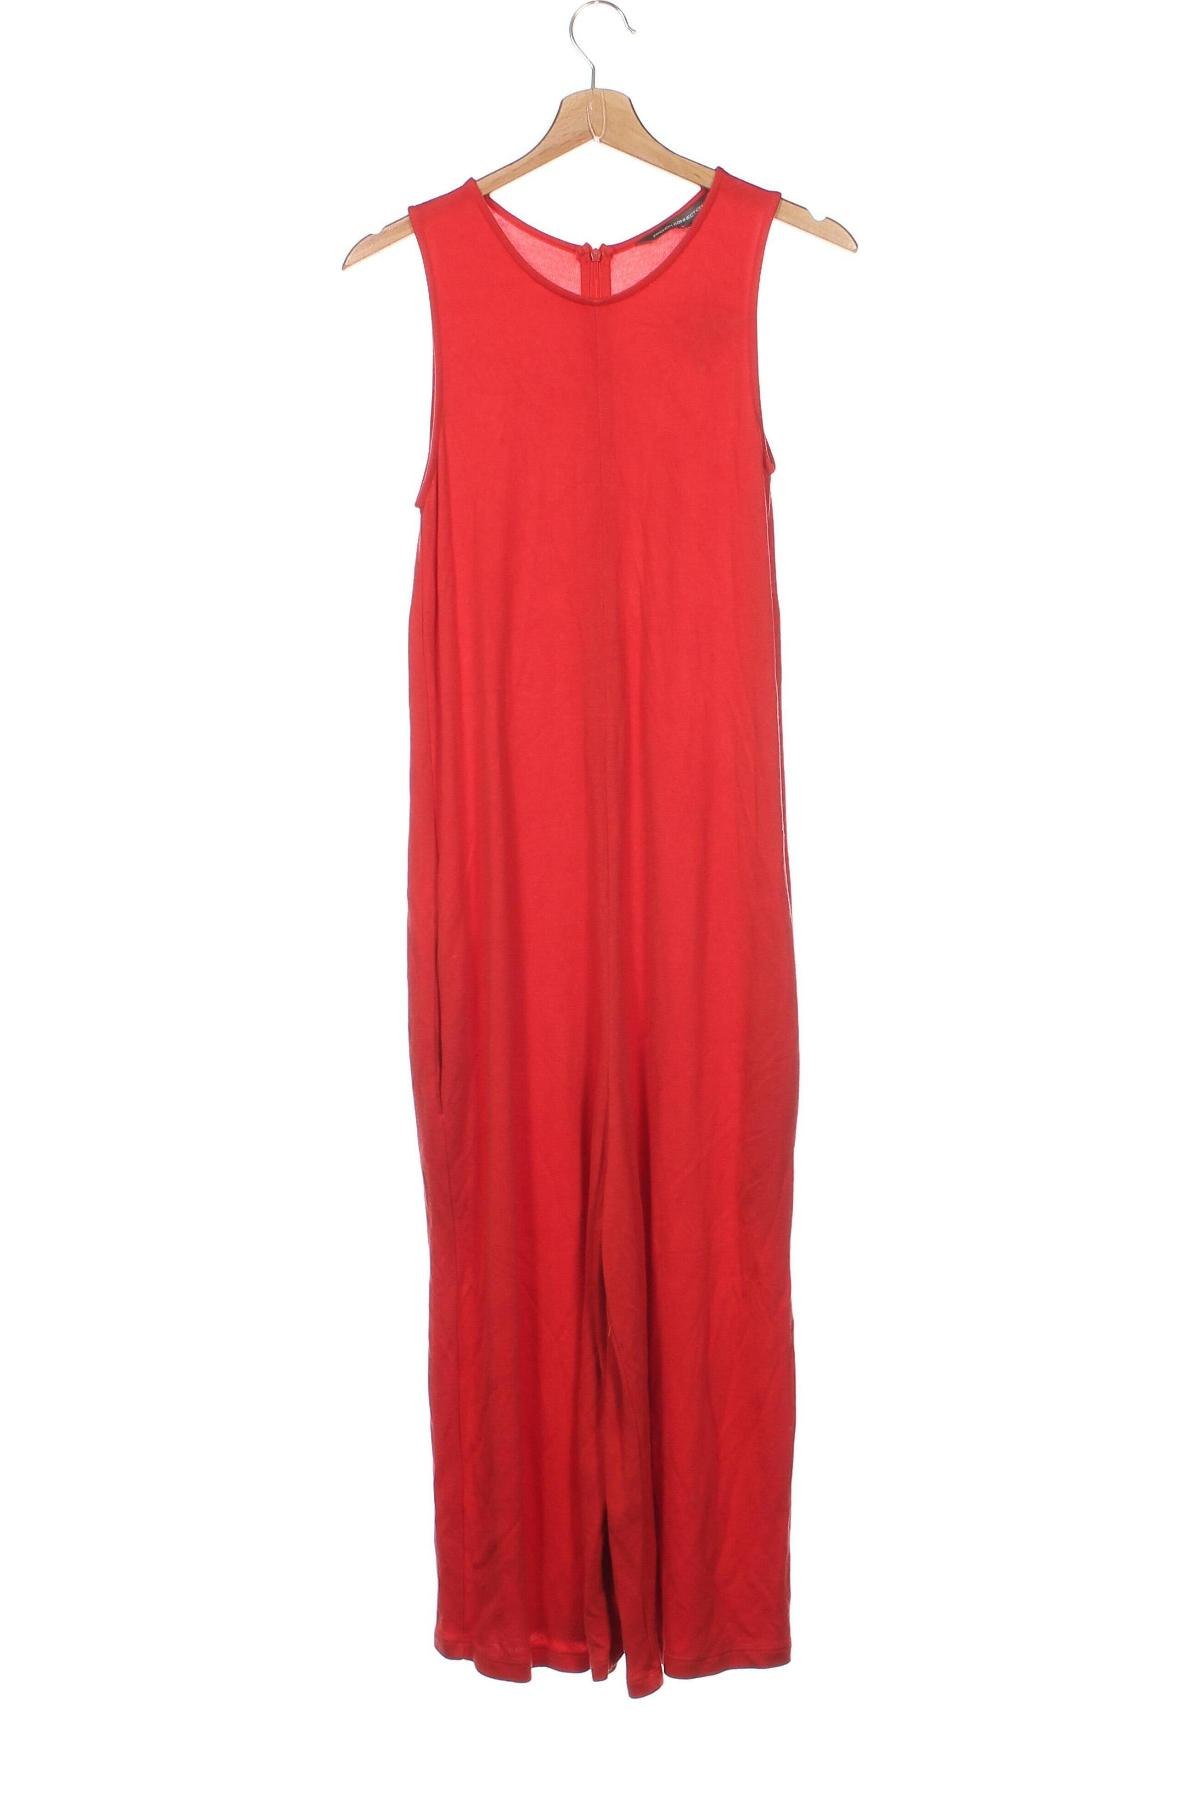 Damen Overall French Connection, Größe XS, Farbe Rot, Preis € 27,77